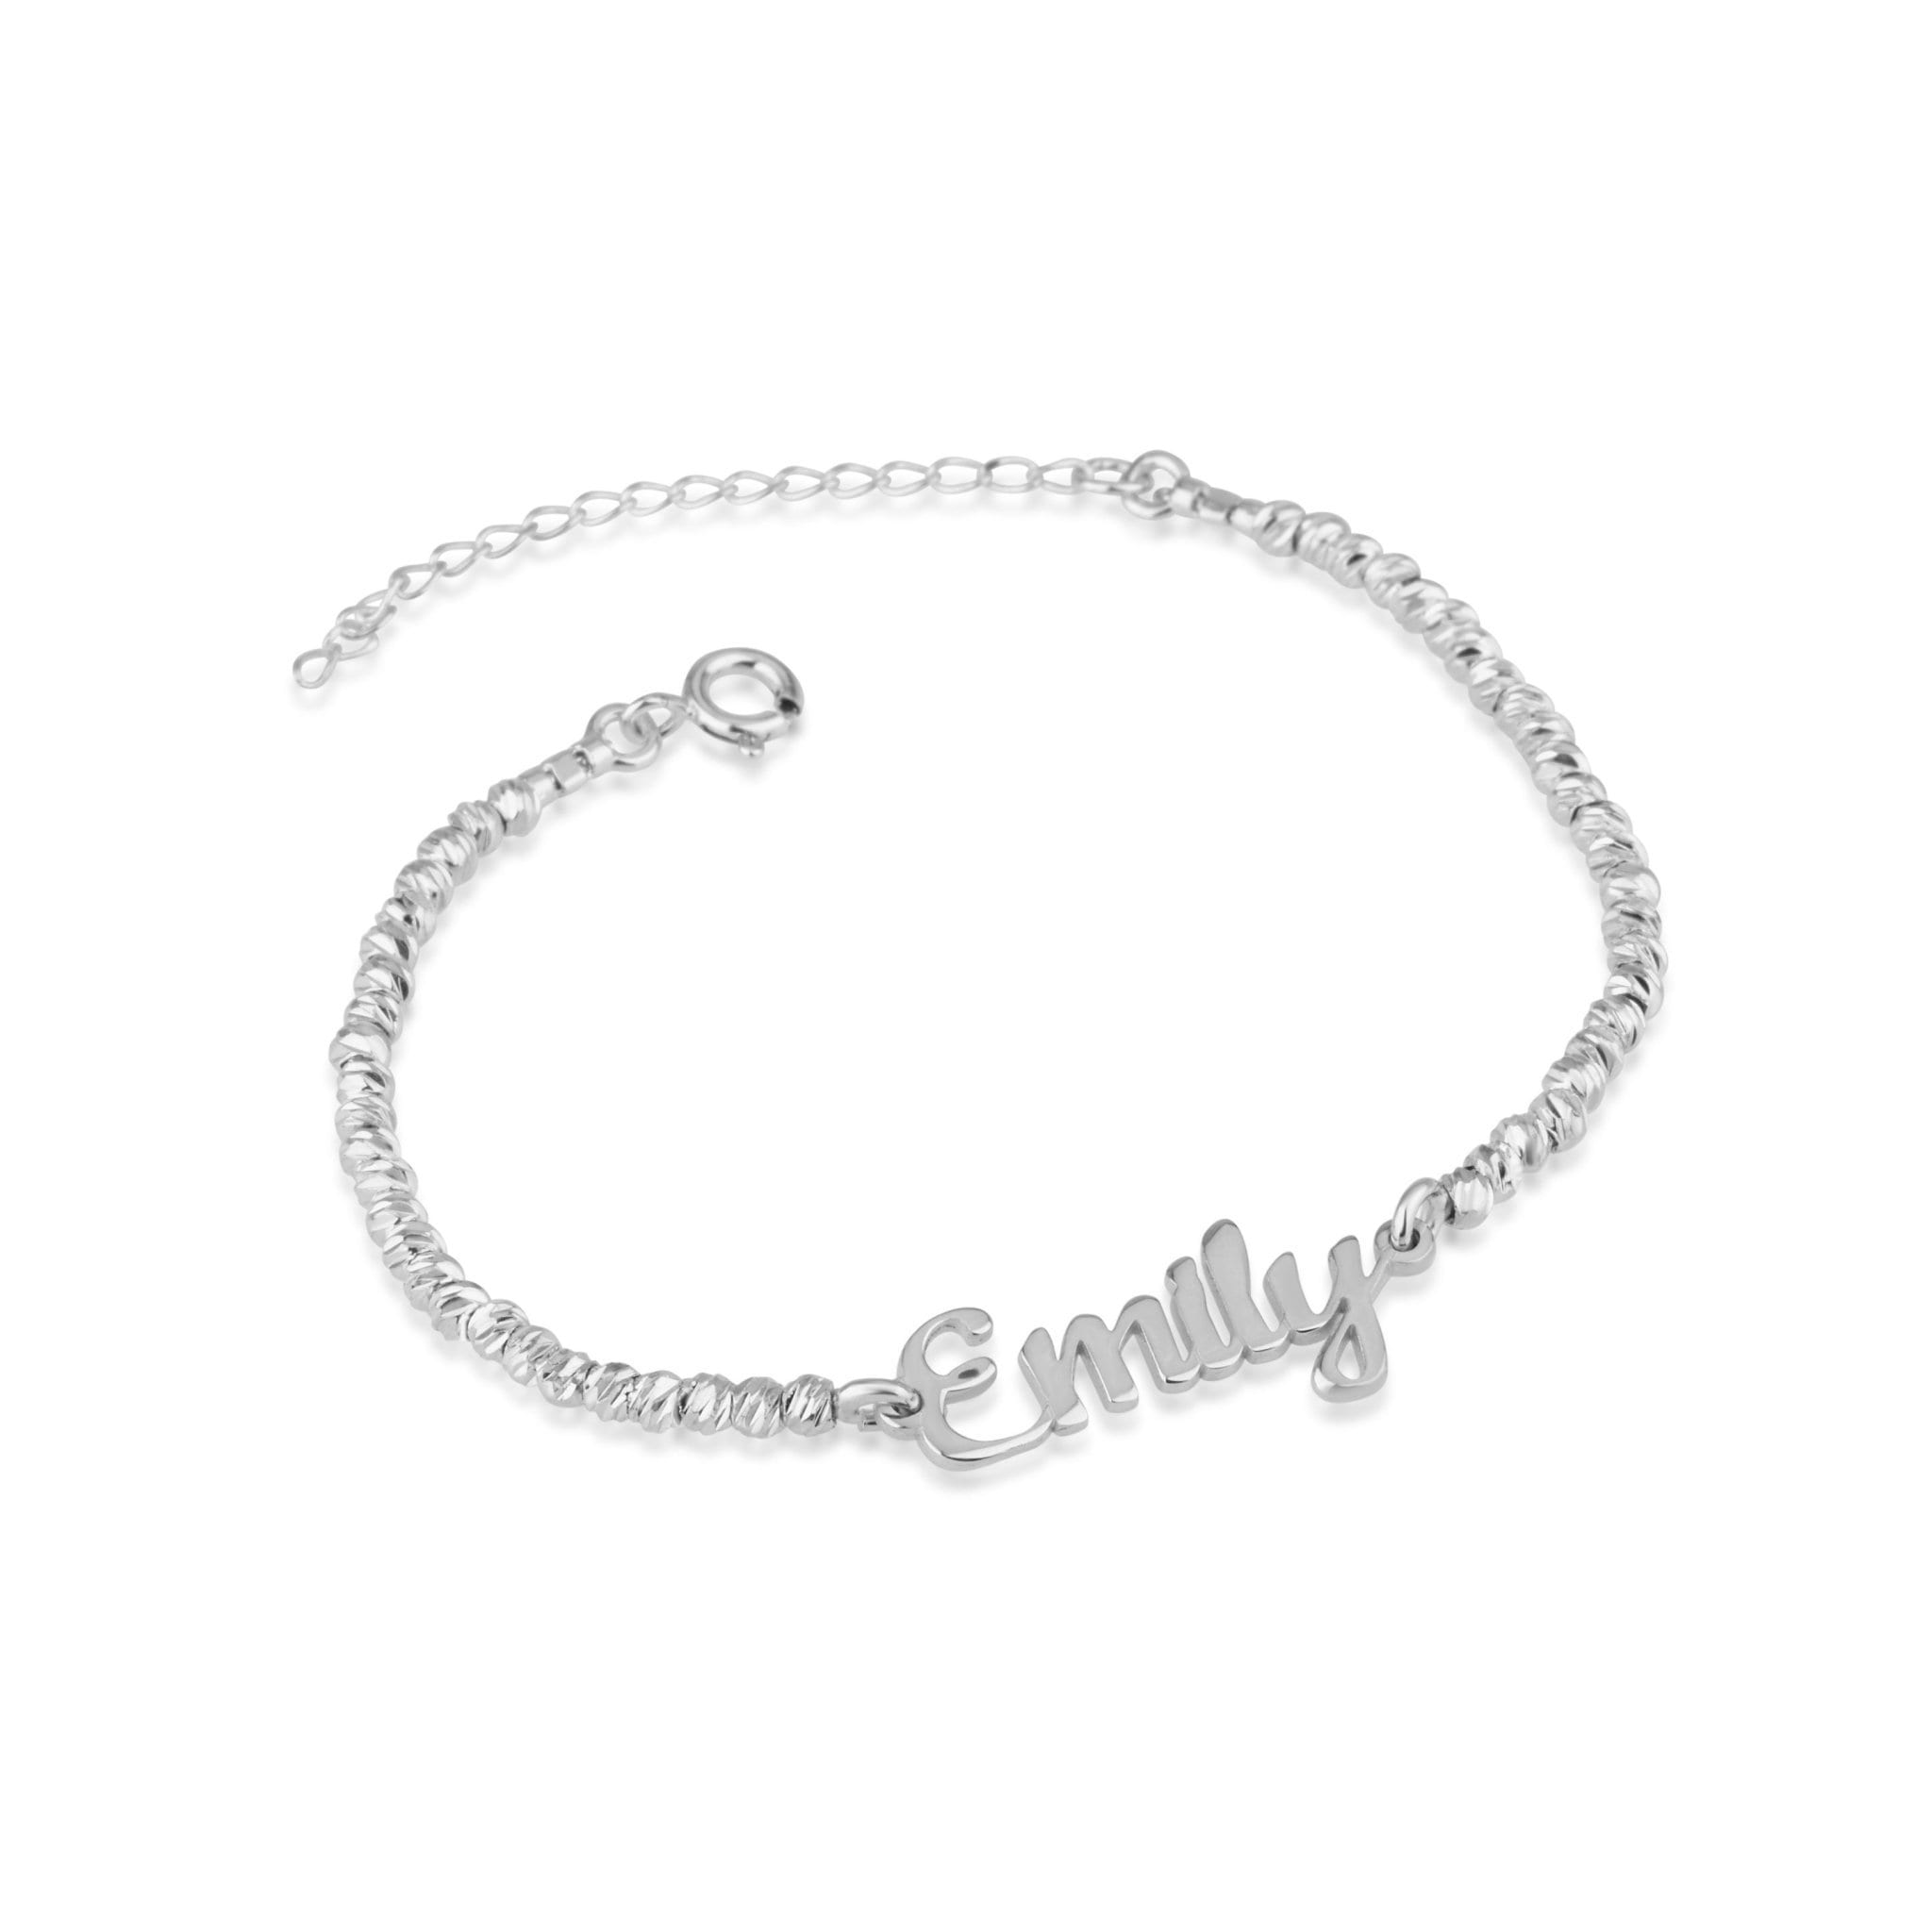 Nameplate Bracelet With Laser Beads - Beleco Jewelry